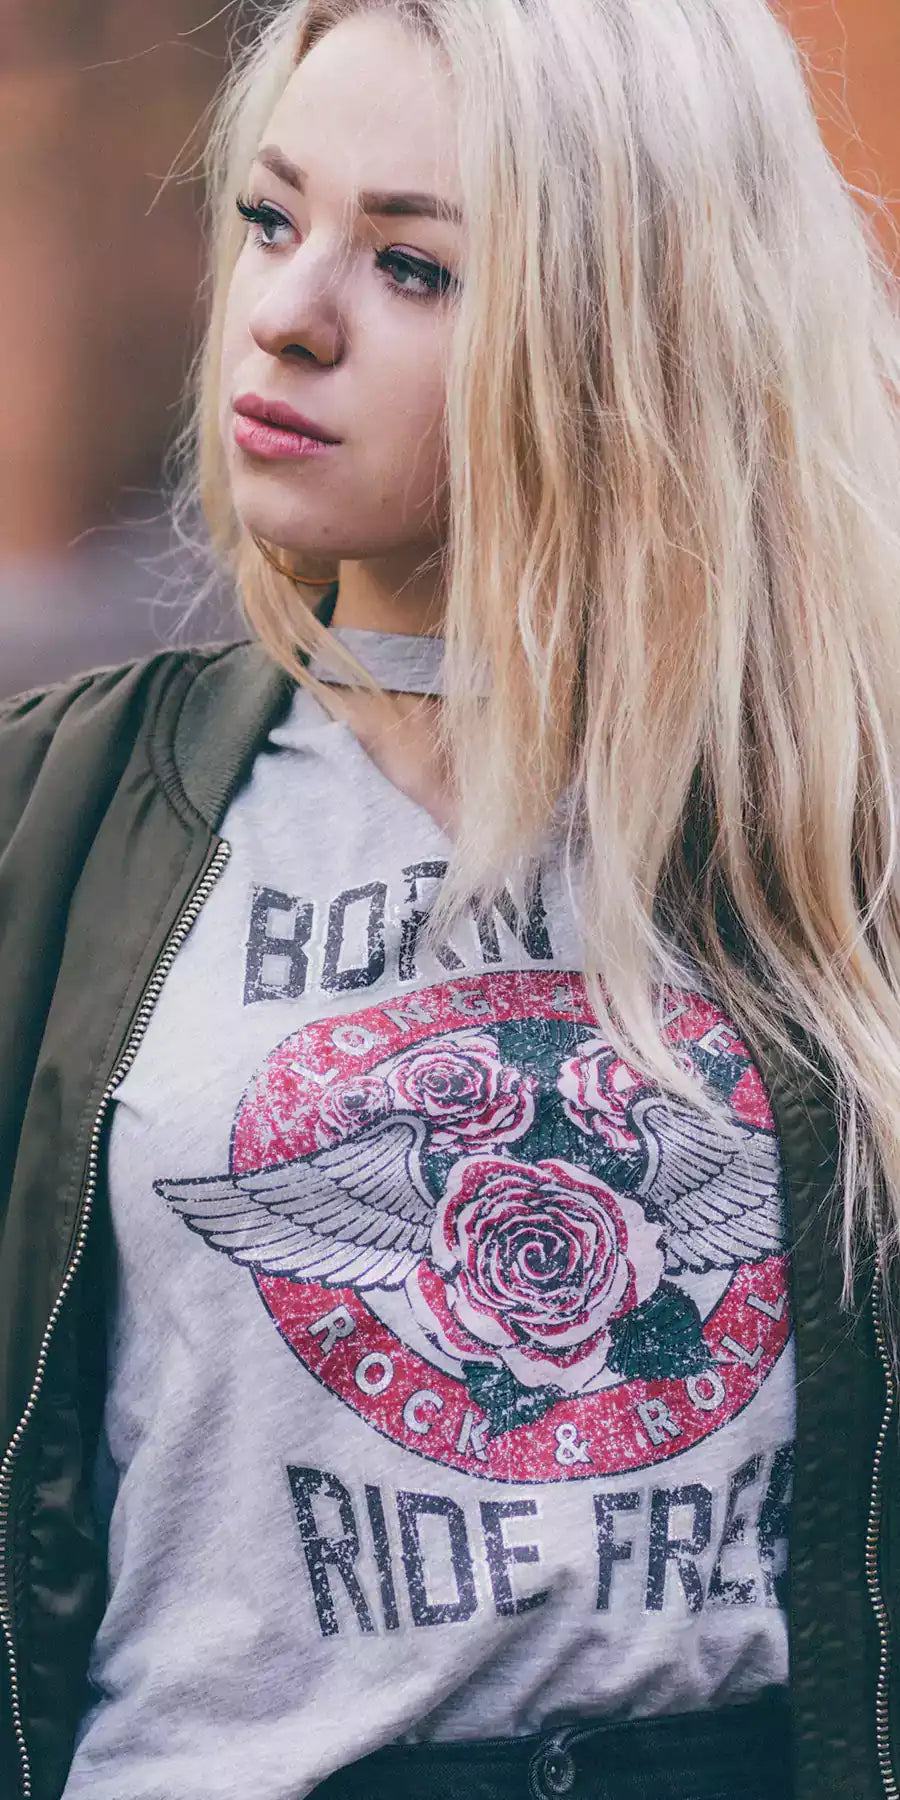 Blond woman wearing an olive colour bomber jacket, underneath a grey t-shirt with a print. The print is roses with wings into a red circle with text - Long live rock & roll. Additional text top and bottom - Born to ride free - mobile